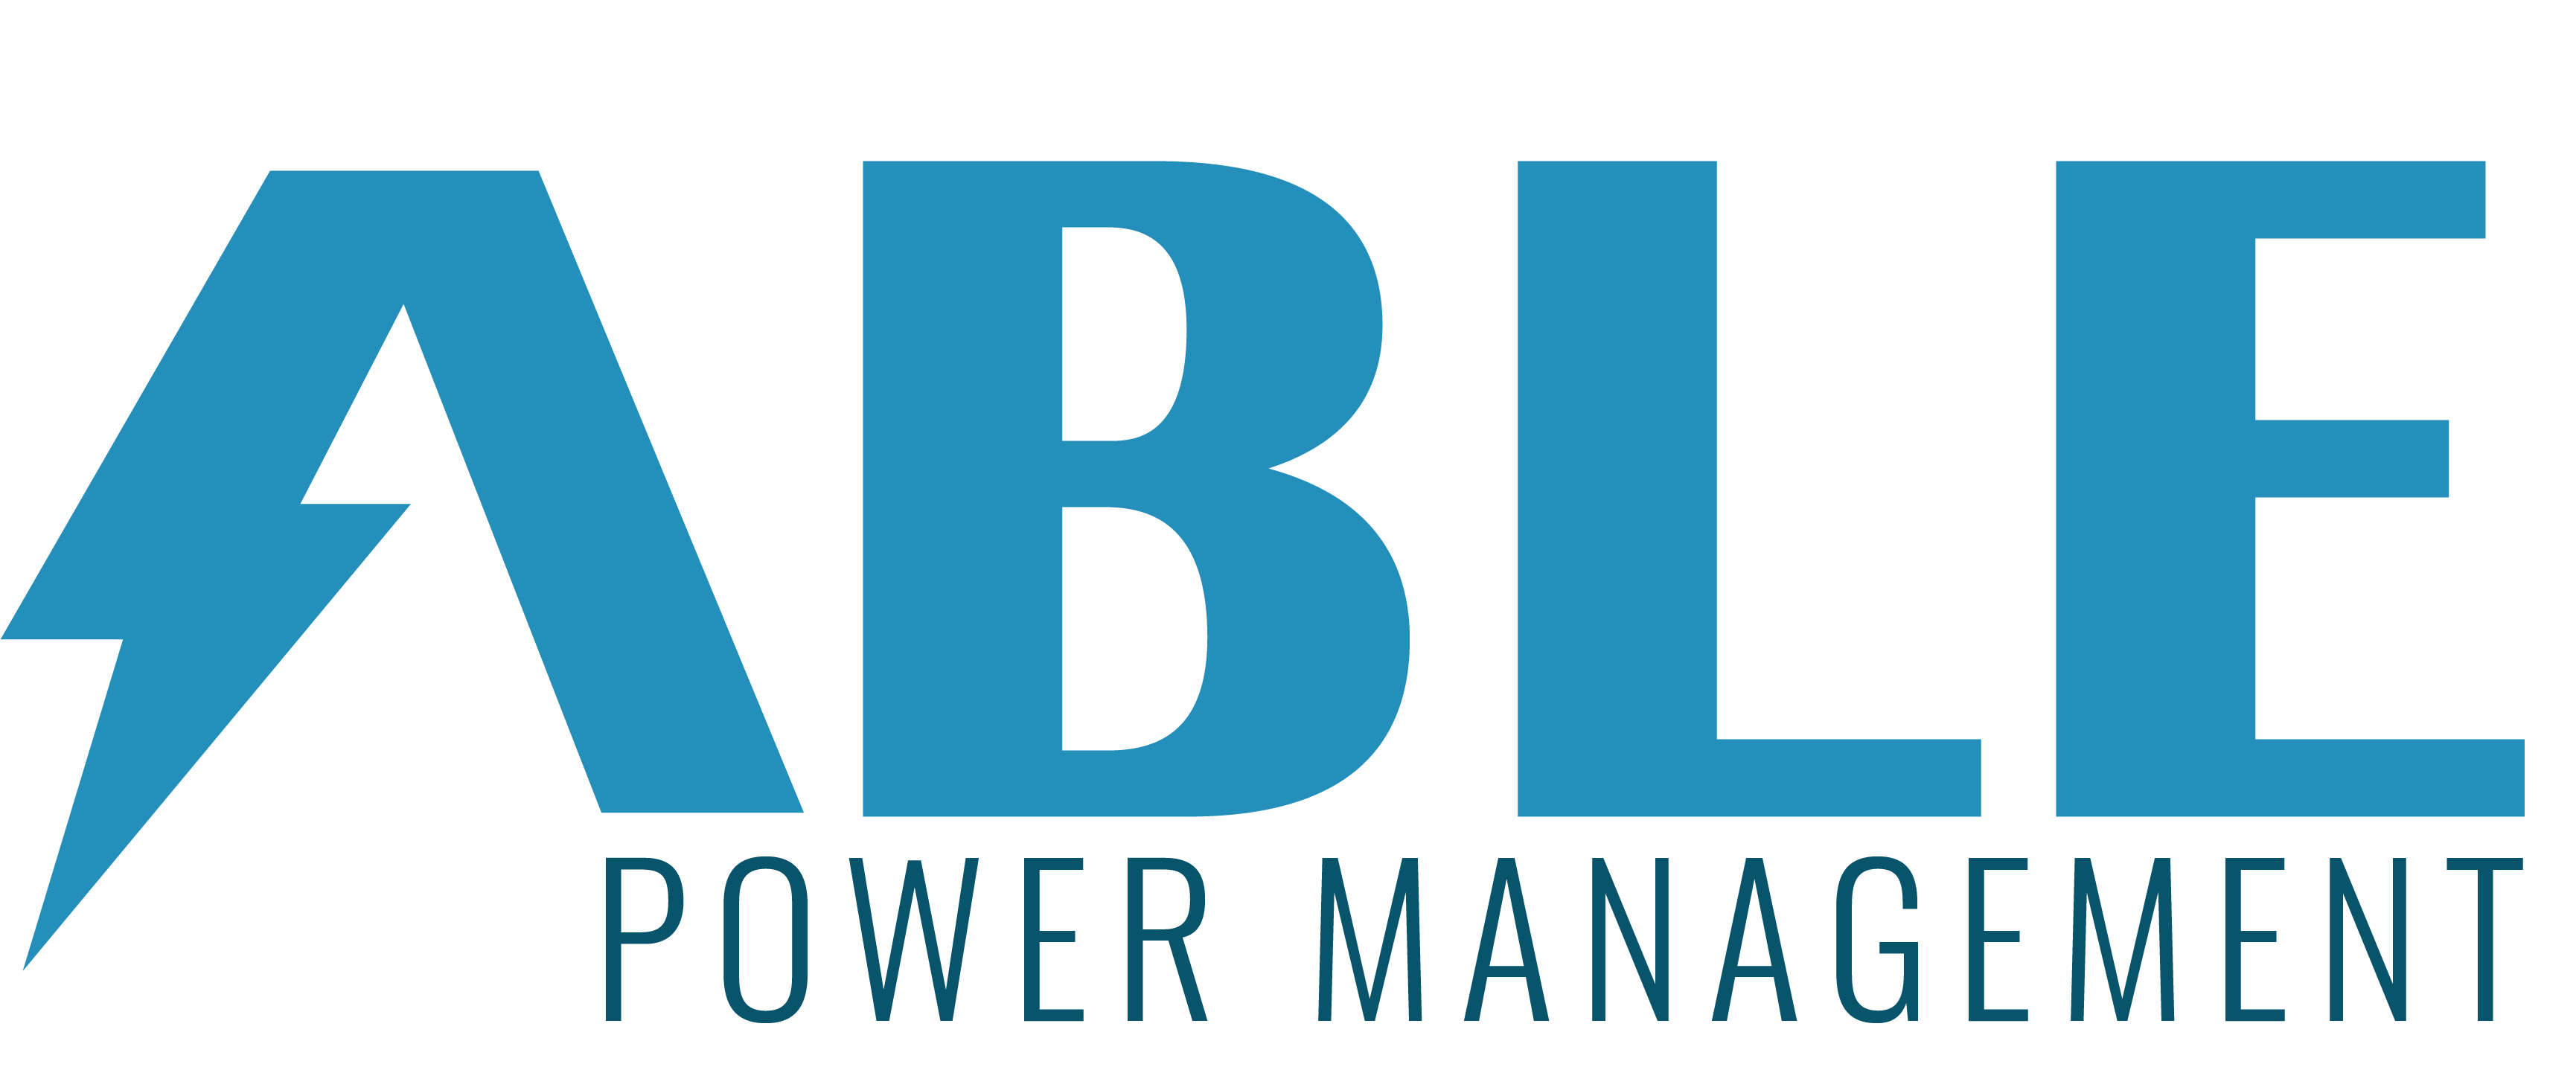 Able Power Management